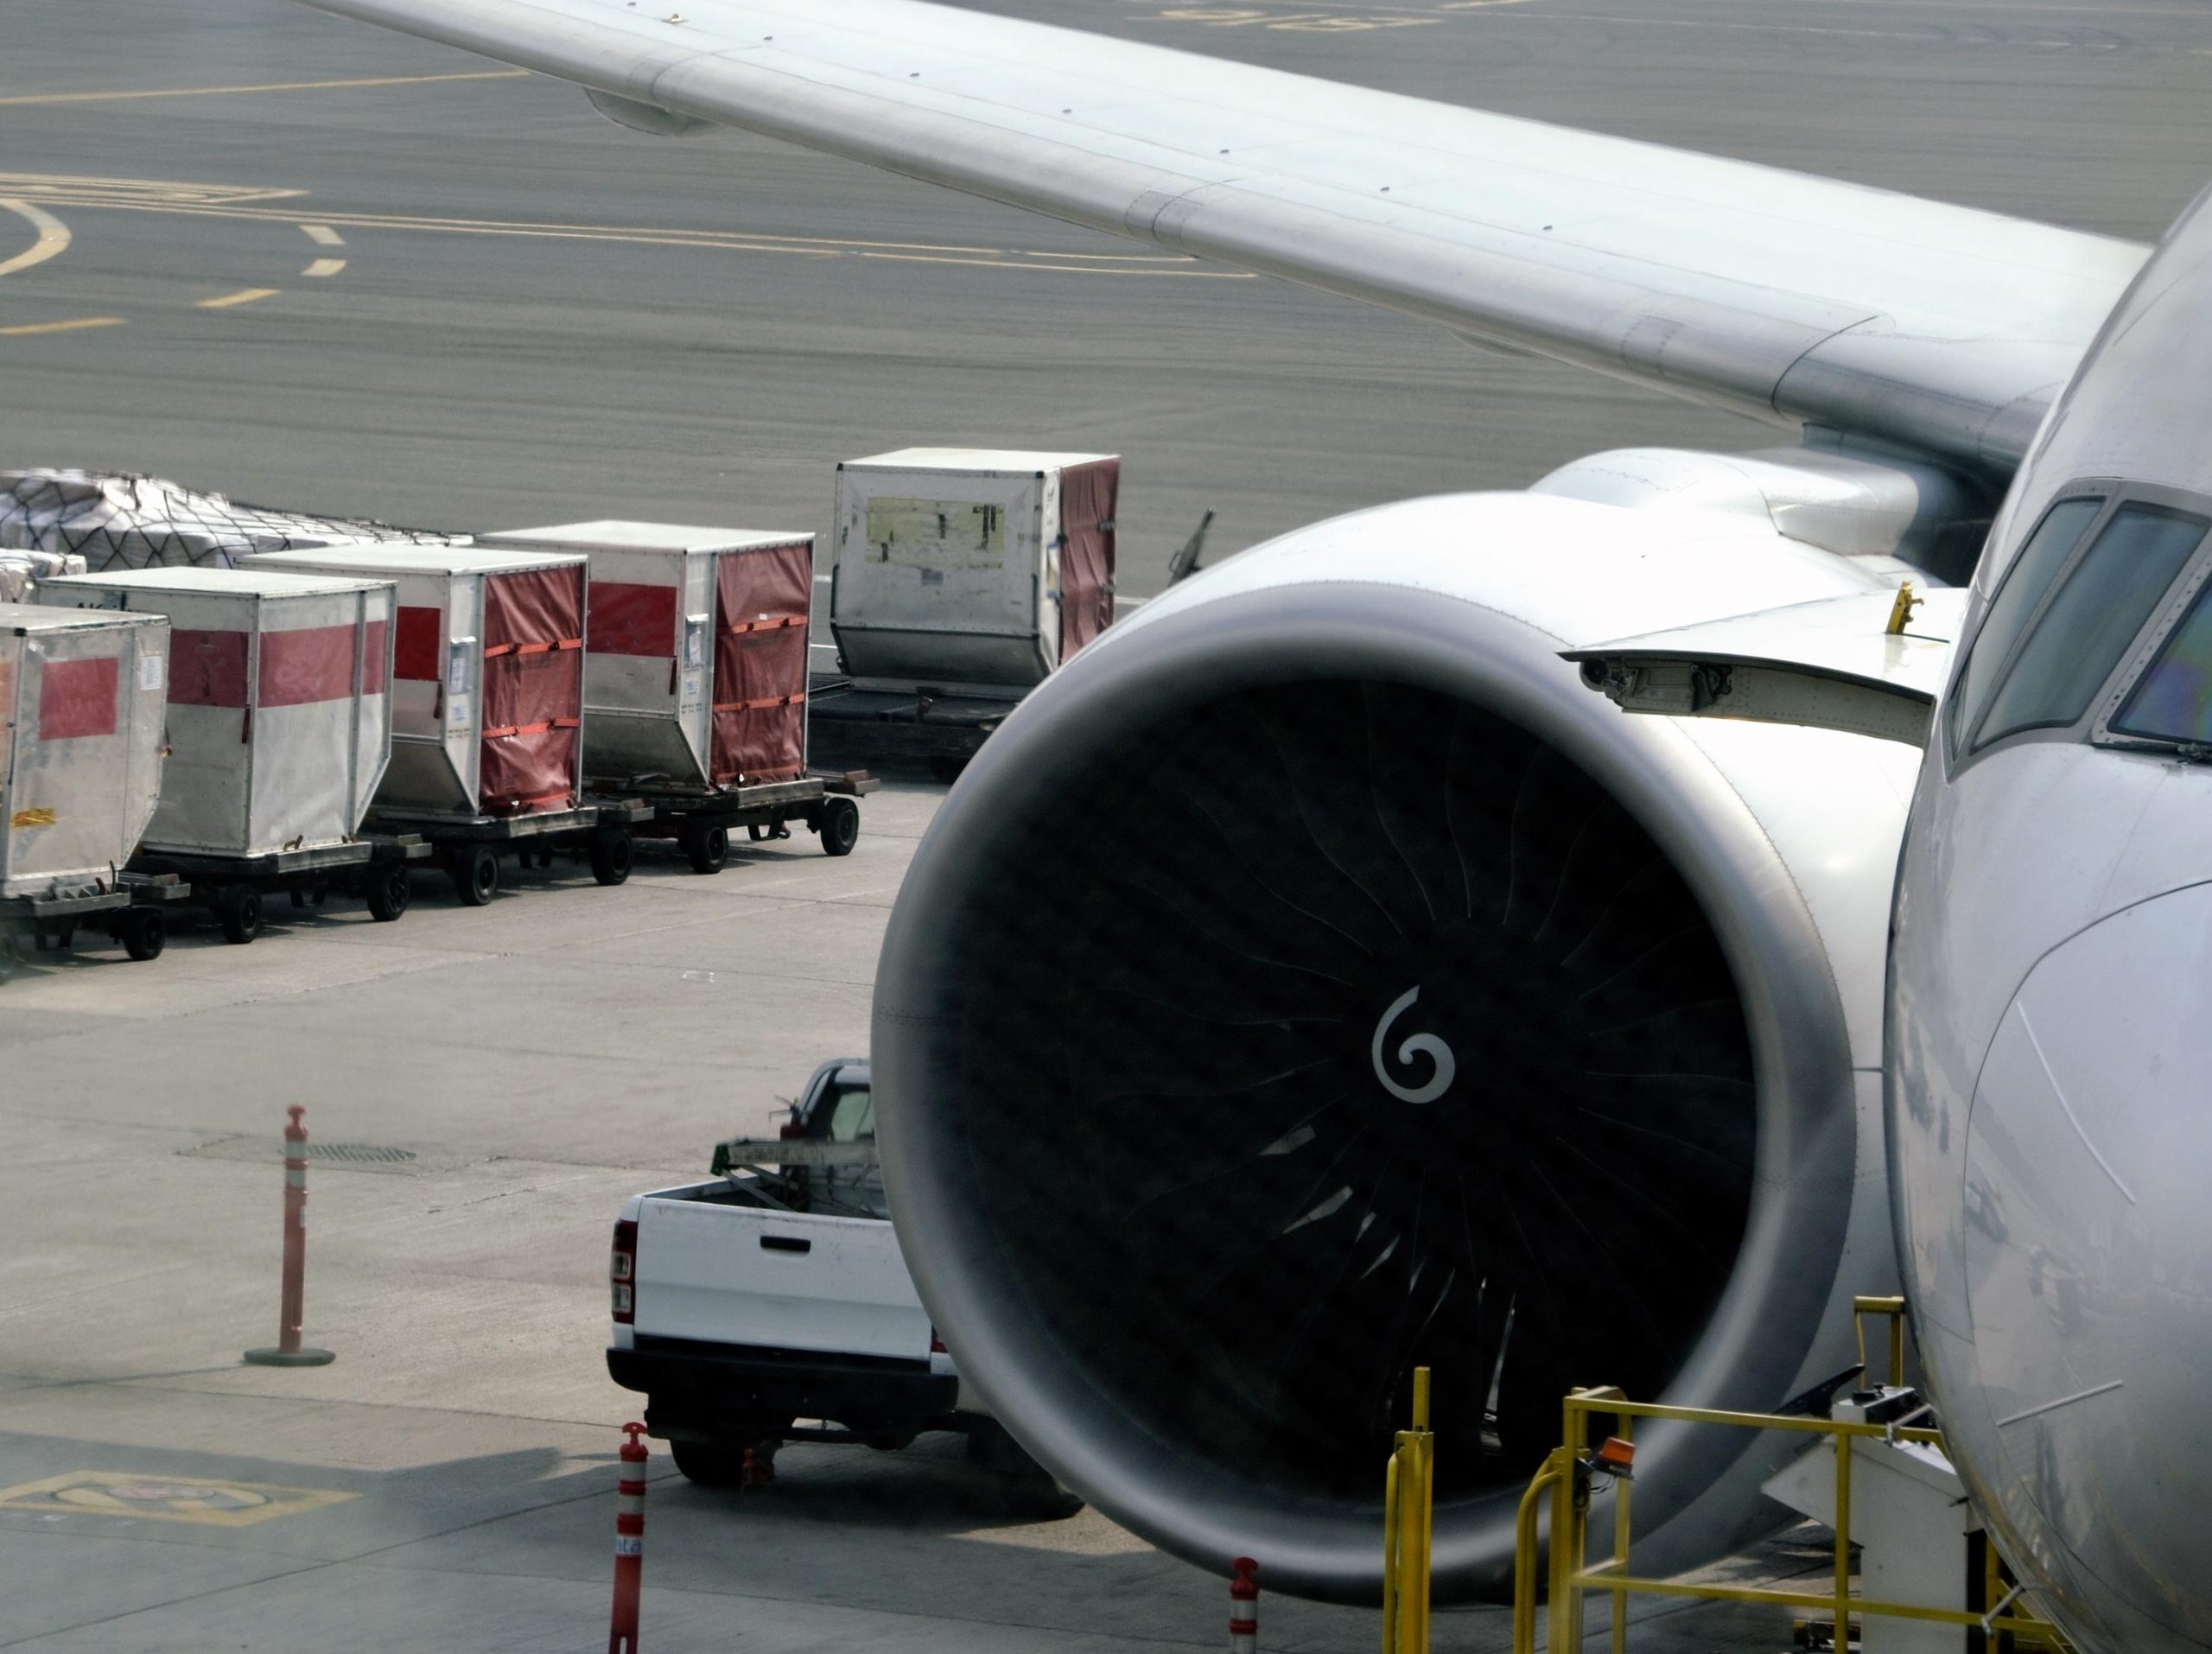 Aeroplane engine and air freight - Air freight can enhance the supply chain process